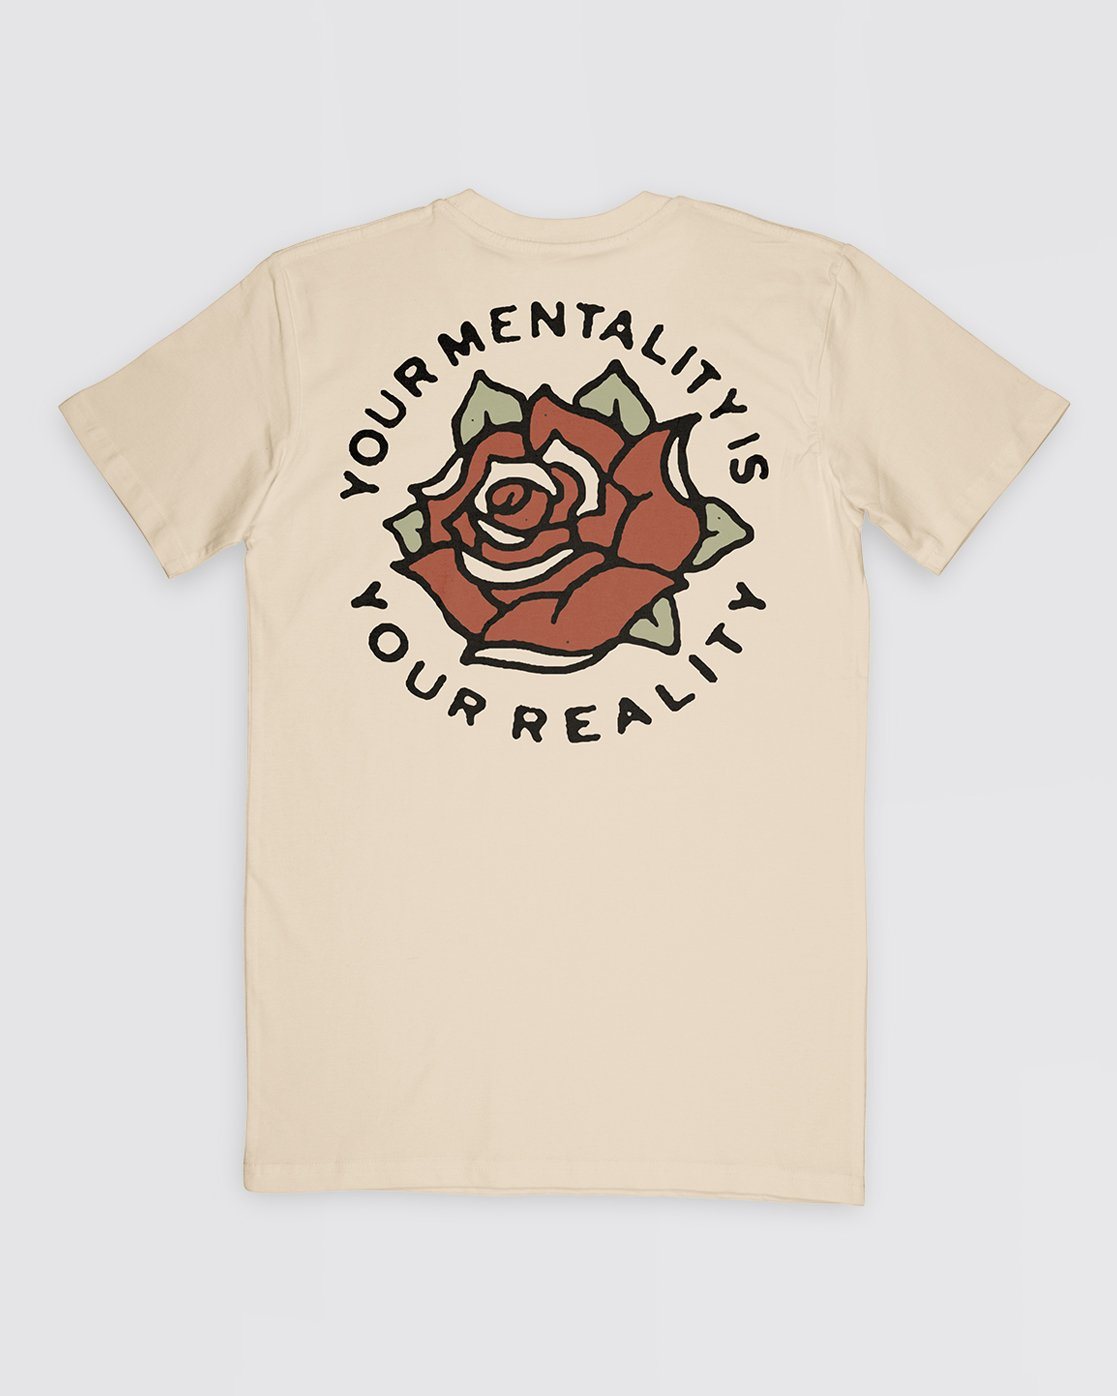 V.3 Mentality Tee Apparel In God We Must